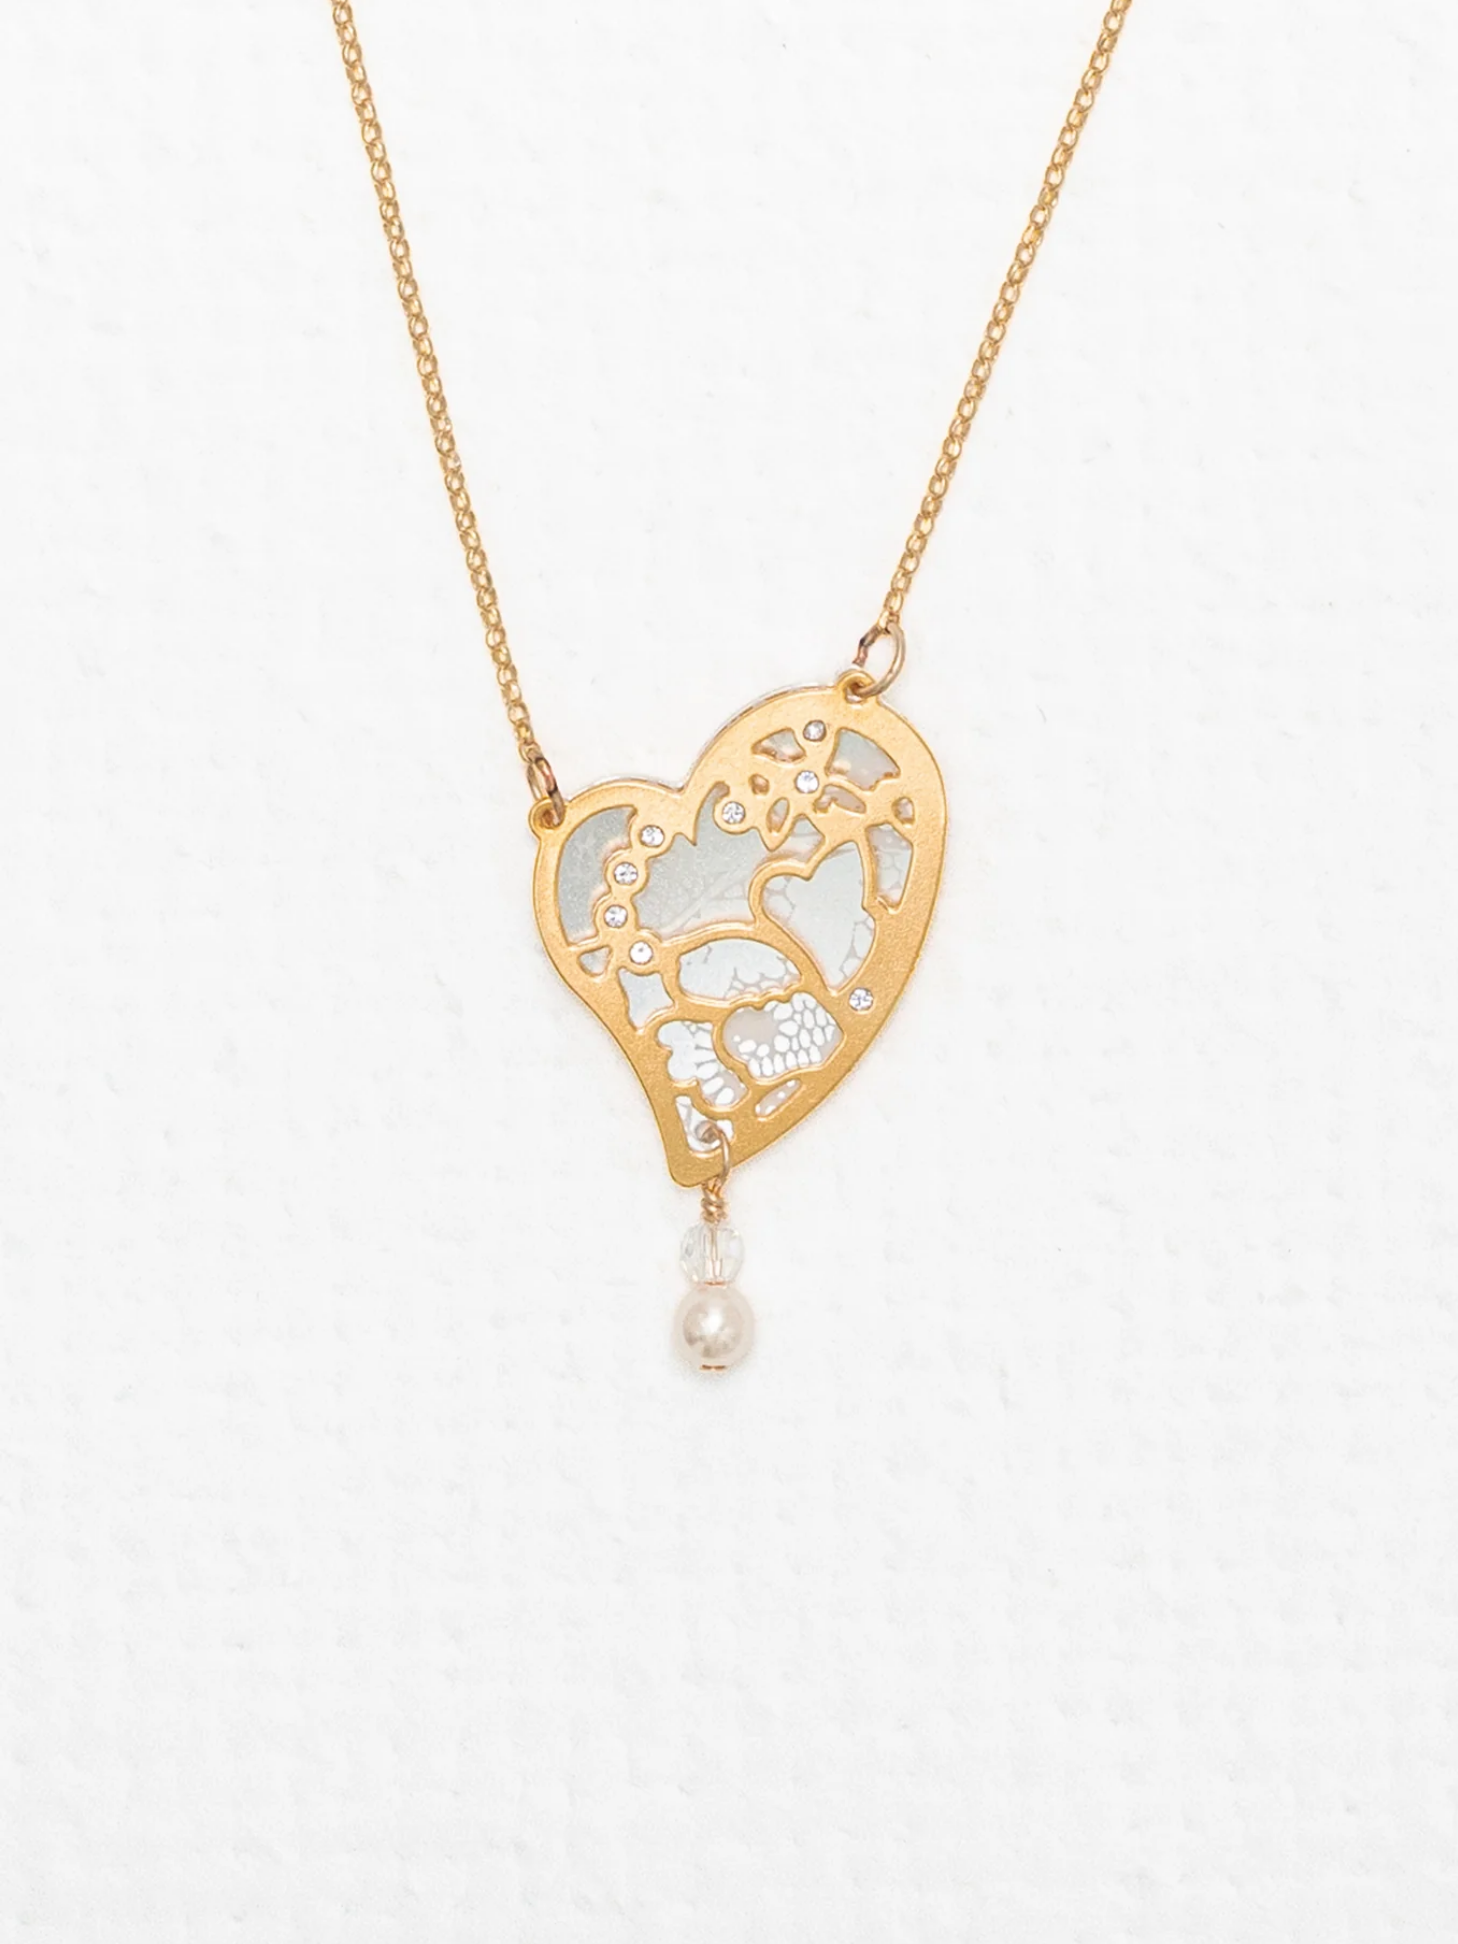 Valena Necklace in Silver & Gold - Heart of the Home LV